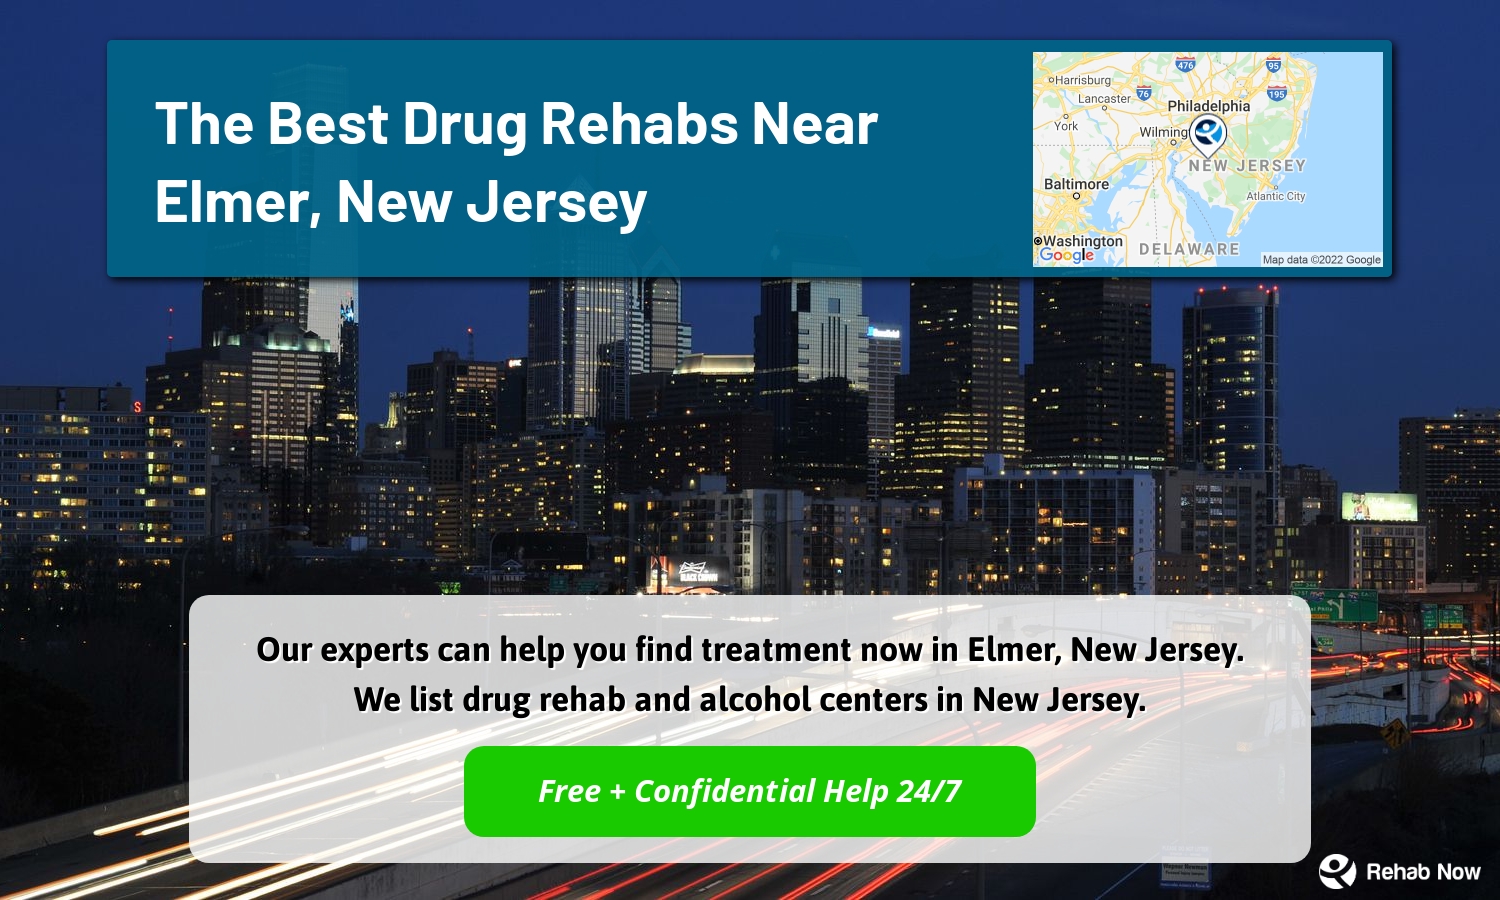 Our experts can help you find treatment now in Elmer, New Jersey. We list drug rehab and alcohol centers in New Jersey.